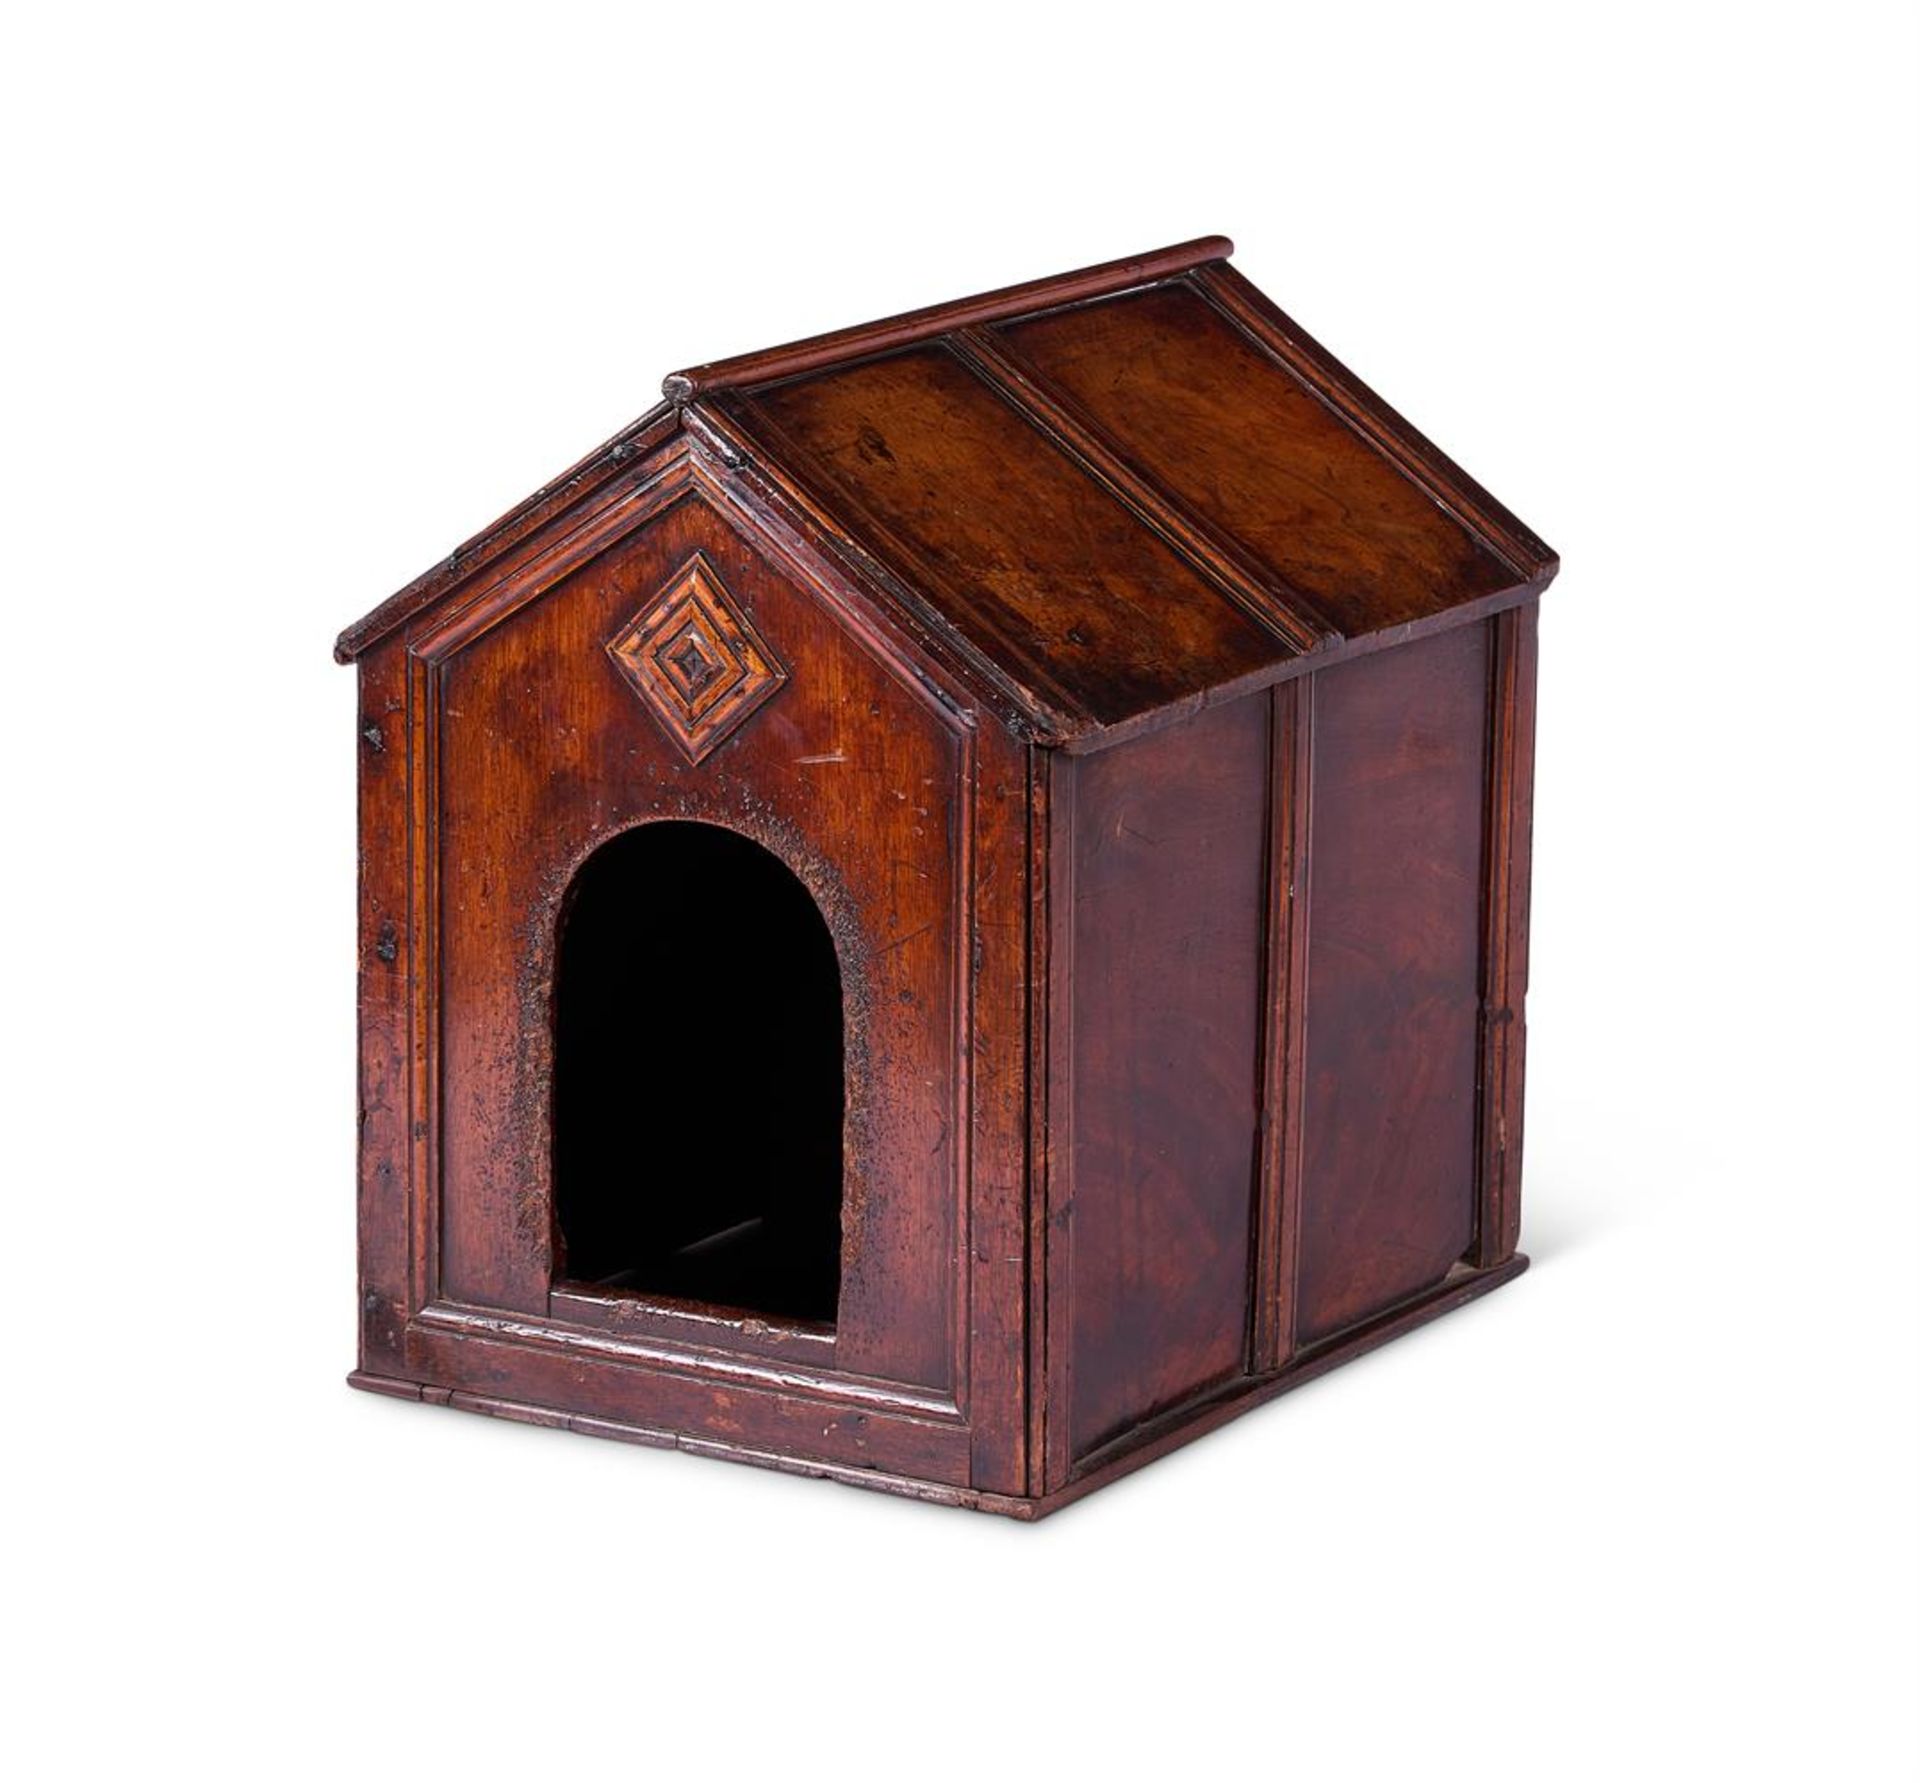 A FRUITWOOD DOG KENNEL LATE 18TH OR EARLY 19TH CENTURY